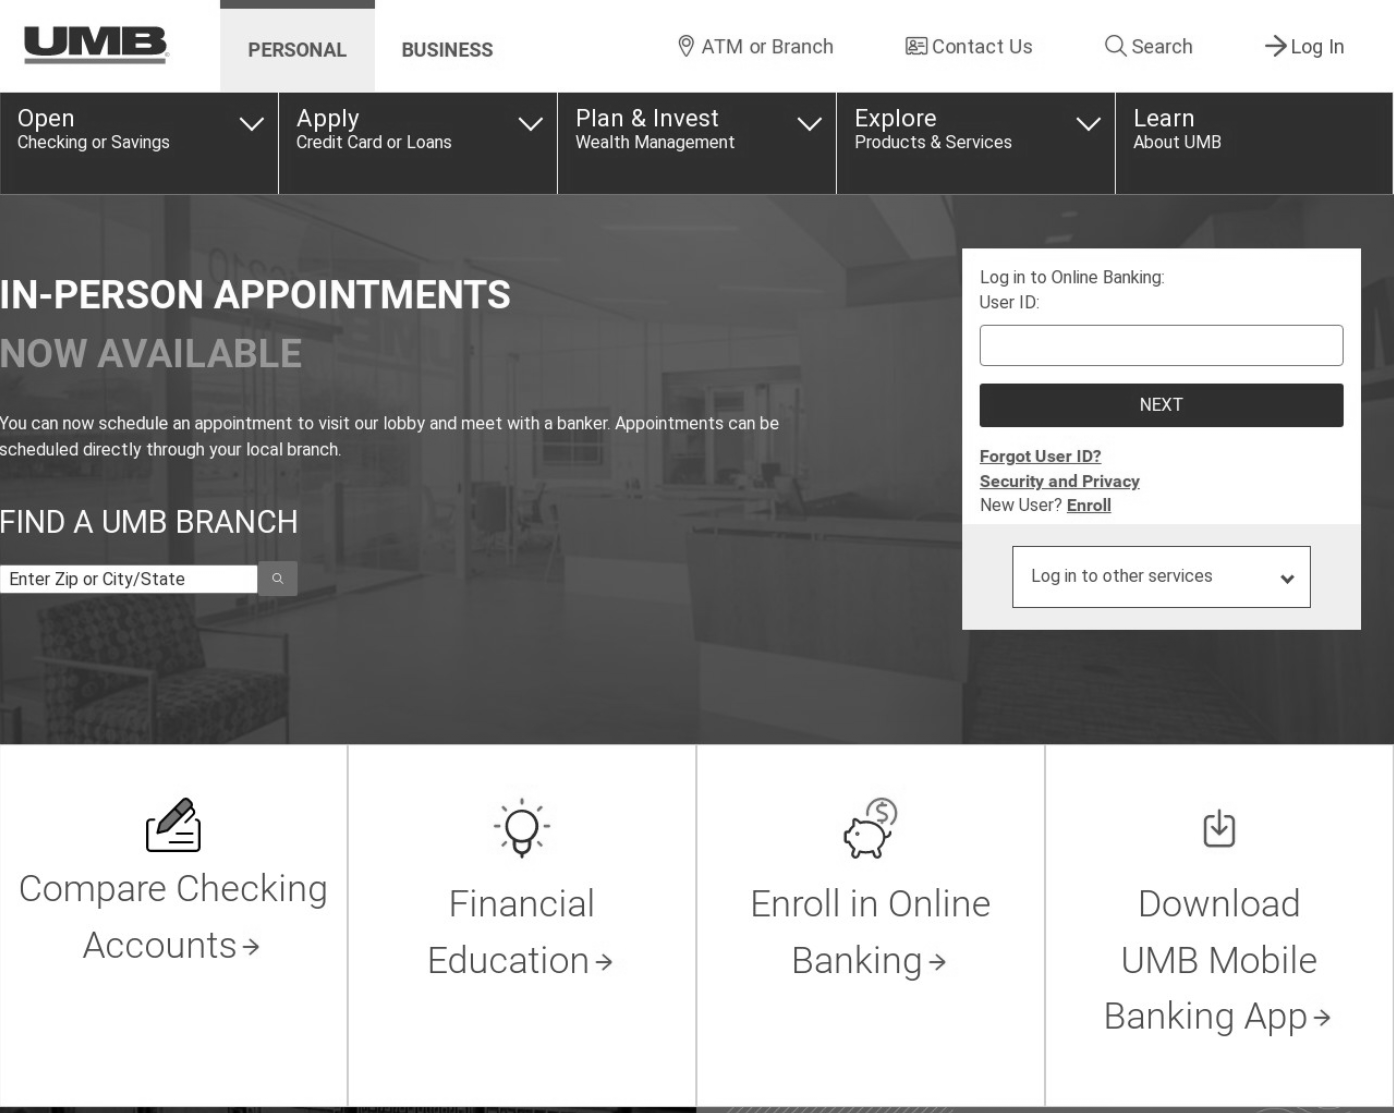 Banking Site Home Page— Splash Image with Find a Branch + Sign In. 